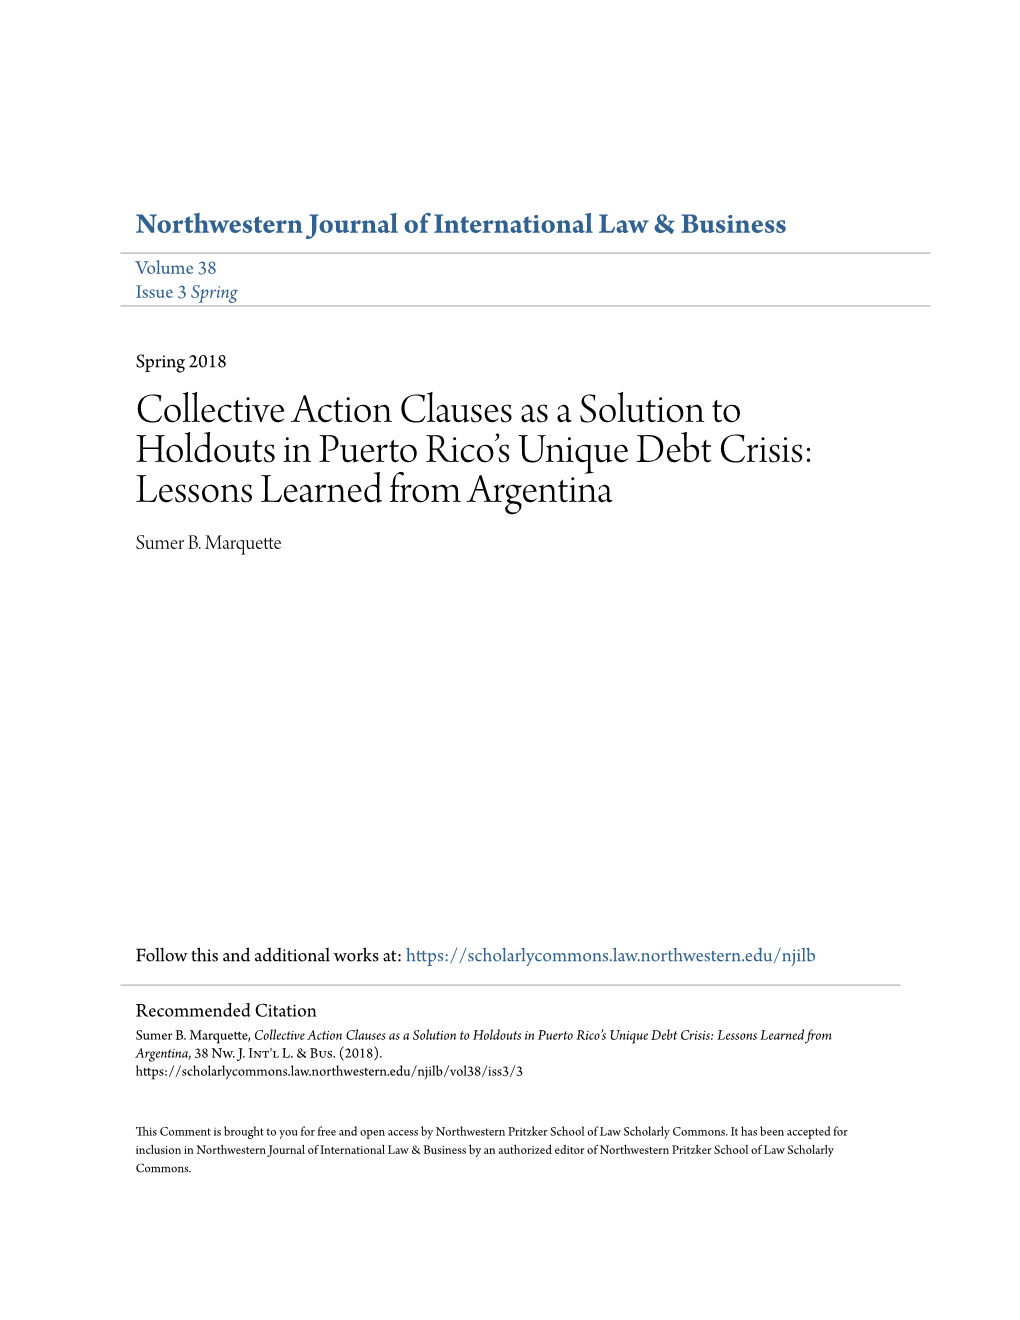 Collective Action Clauses As a Solution to Holdouts in Puerto Rico’S Unique Debt Crisis: Lessons Learned from Argentina Sumer B